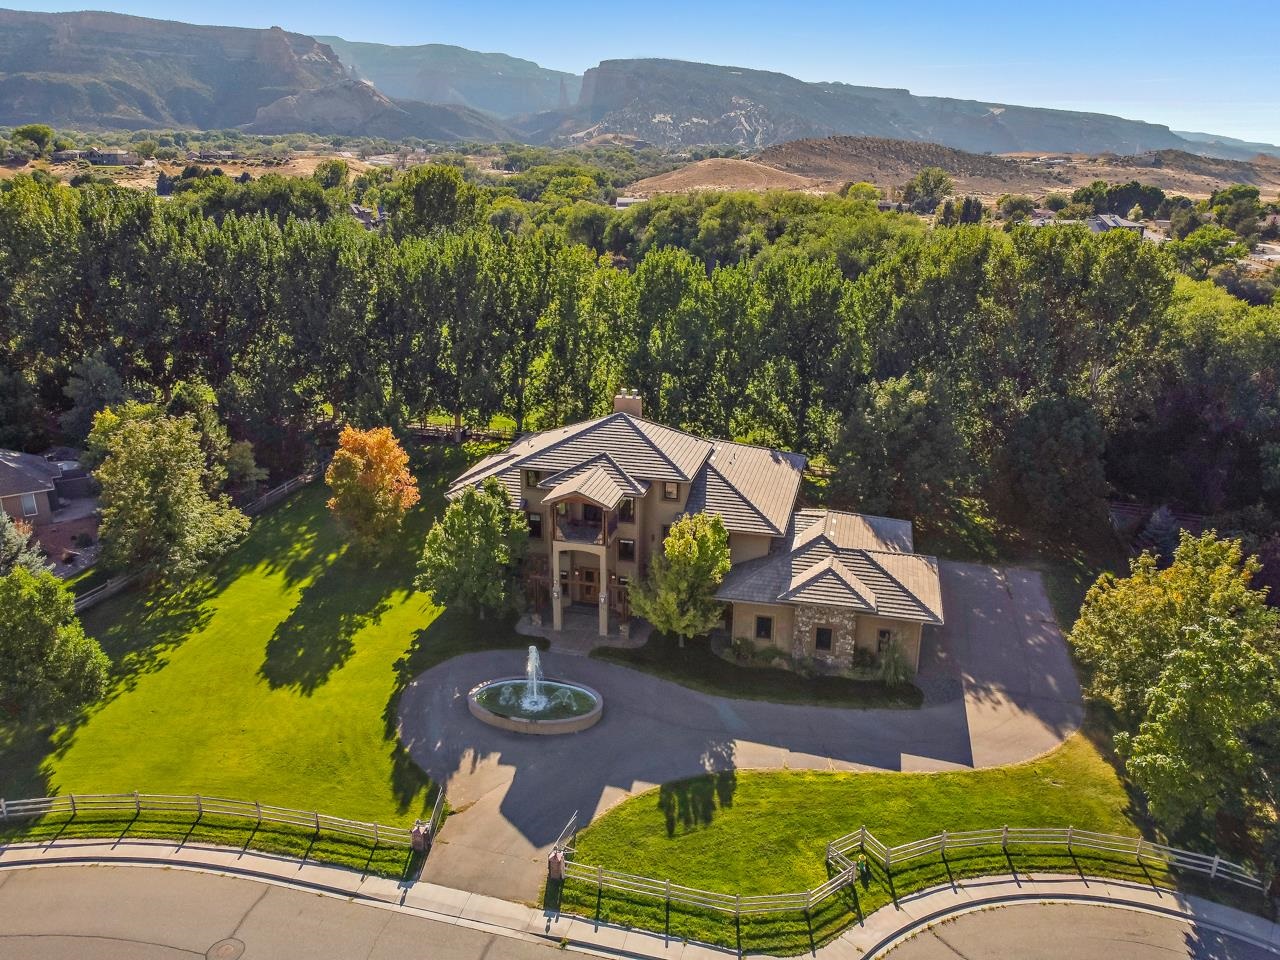 Welcome to this incredible custom-built Redlands home in the premier Independence Valley subdivision! You will be awed from the moment you pull up to this 1.1 acre, fully fenced estate with electronic gate, a beautiful fountain in front, a pristine lawn, & mature trees. The three story home has a unique floor plan that optimizes the incredible views of the Bookcliffs & Colorado National Monument. The airy, 3-story entry features custom tile work & multiple closets for storage. The living space beyond has a gas fireplace, built-in nook for a TV & a wet bar complete with mini fridge & microwave off to the side. This space opens up to a covered patio with room to entertain & relax. You’ll find two additional bedrooms, each with a full en suite bath & walk-in closet, as well as a theater room, half bath for guests, & the laundry room on this level. The elevator  is by the entrance from the garage, which makes transporting groceries to the main level a breeze. This second story has another large living room & fireplace & both formal and informal dining rooms. The gorgeous chef's kitchen has a 6-burner gas stove, double wall ovens, two microwaves, a walk-in & walk-through pantry, beautiful granite slab countertops & plenty of storage. You’ll also find a large guest suite with an attached 4-piece, 3/4 bathroom & walk-in closet, a half bath, & an office. The primary suite is also on the second level & is a true retreat, with private deck access, a large sitting area, a 5-piece bath including a luxurious steam shower, a 12x20 dressing room in addition to a walk-in closet, a gas fireplace, & stunning views. The covered deck on this level is perfect for alfresco dining & watching the sunsets. The third story is accessible by both the elevator & stairs, & includes a large bonus room, that while currently used as a craft room has potential to be an excellent executive office or entertainment space, that has another wet bar with a drink fridge & microwave, a half bath, a large closet, & a private open patio with views of the surrounding area & mountains. If this home isn't jaw dropping enough, the oversized 3-bay, 4-car garage with an RV bay & built-in storage might do the trick, giving you plenty of room for storage, tools, toys, hobbies, & vehicles. With additional space behind the garage for parking, you’ll have no shortage of room for adventure vehicles. Close to schools, trails, shopping, & more, this is a fantastic find in Western Colorado - book a showing today!